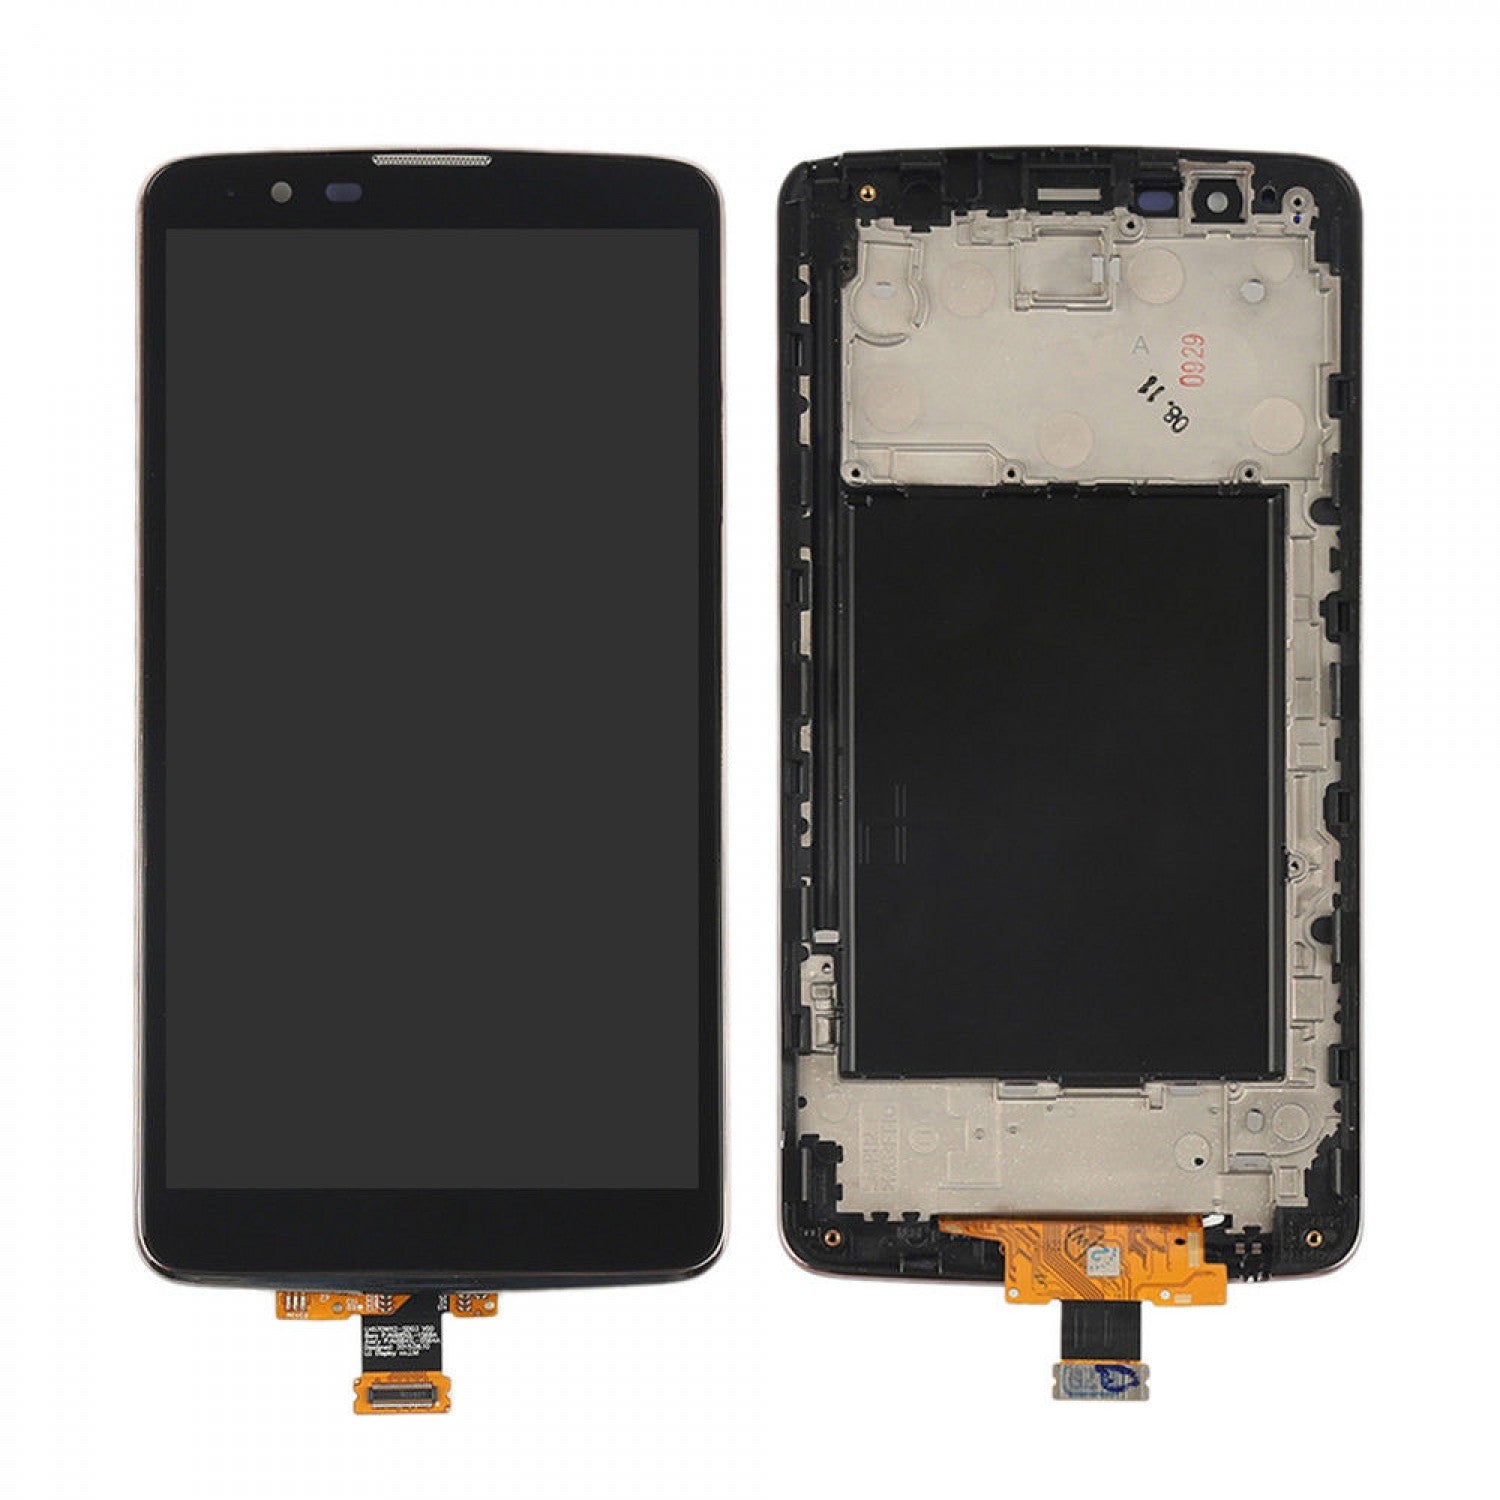 LG Stylo 2 LCD Screen and Digitizer Assembly